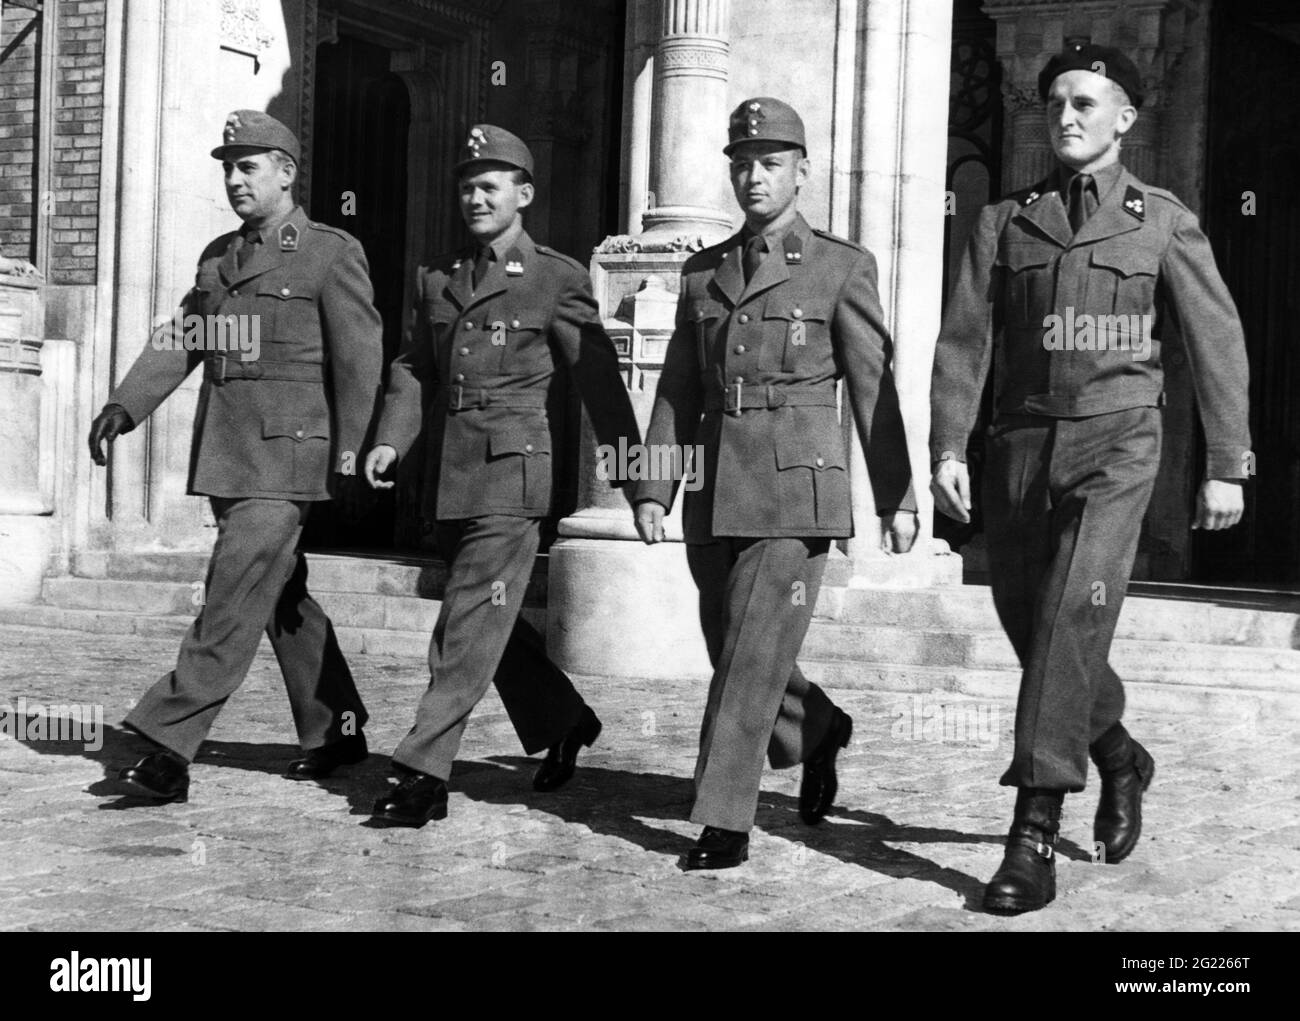 military, Austria, Army, new uniforms, Vienna, 29.7.1956, ADDITIONAL-RIGHTS-CLEARANCE-INFO-NOT-AVAILABLE Stock Photo